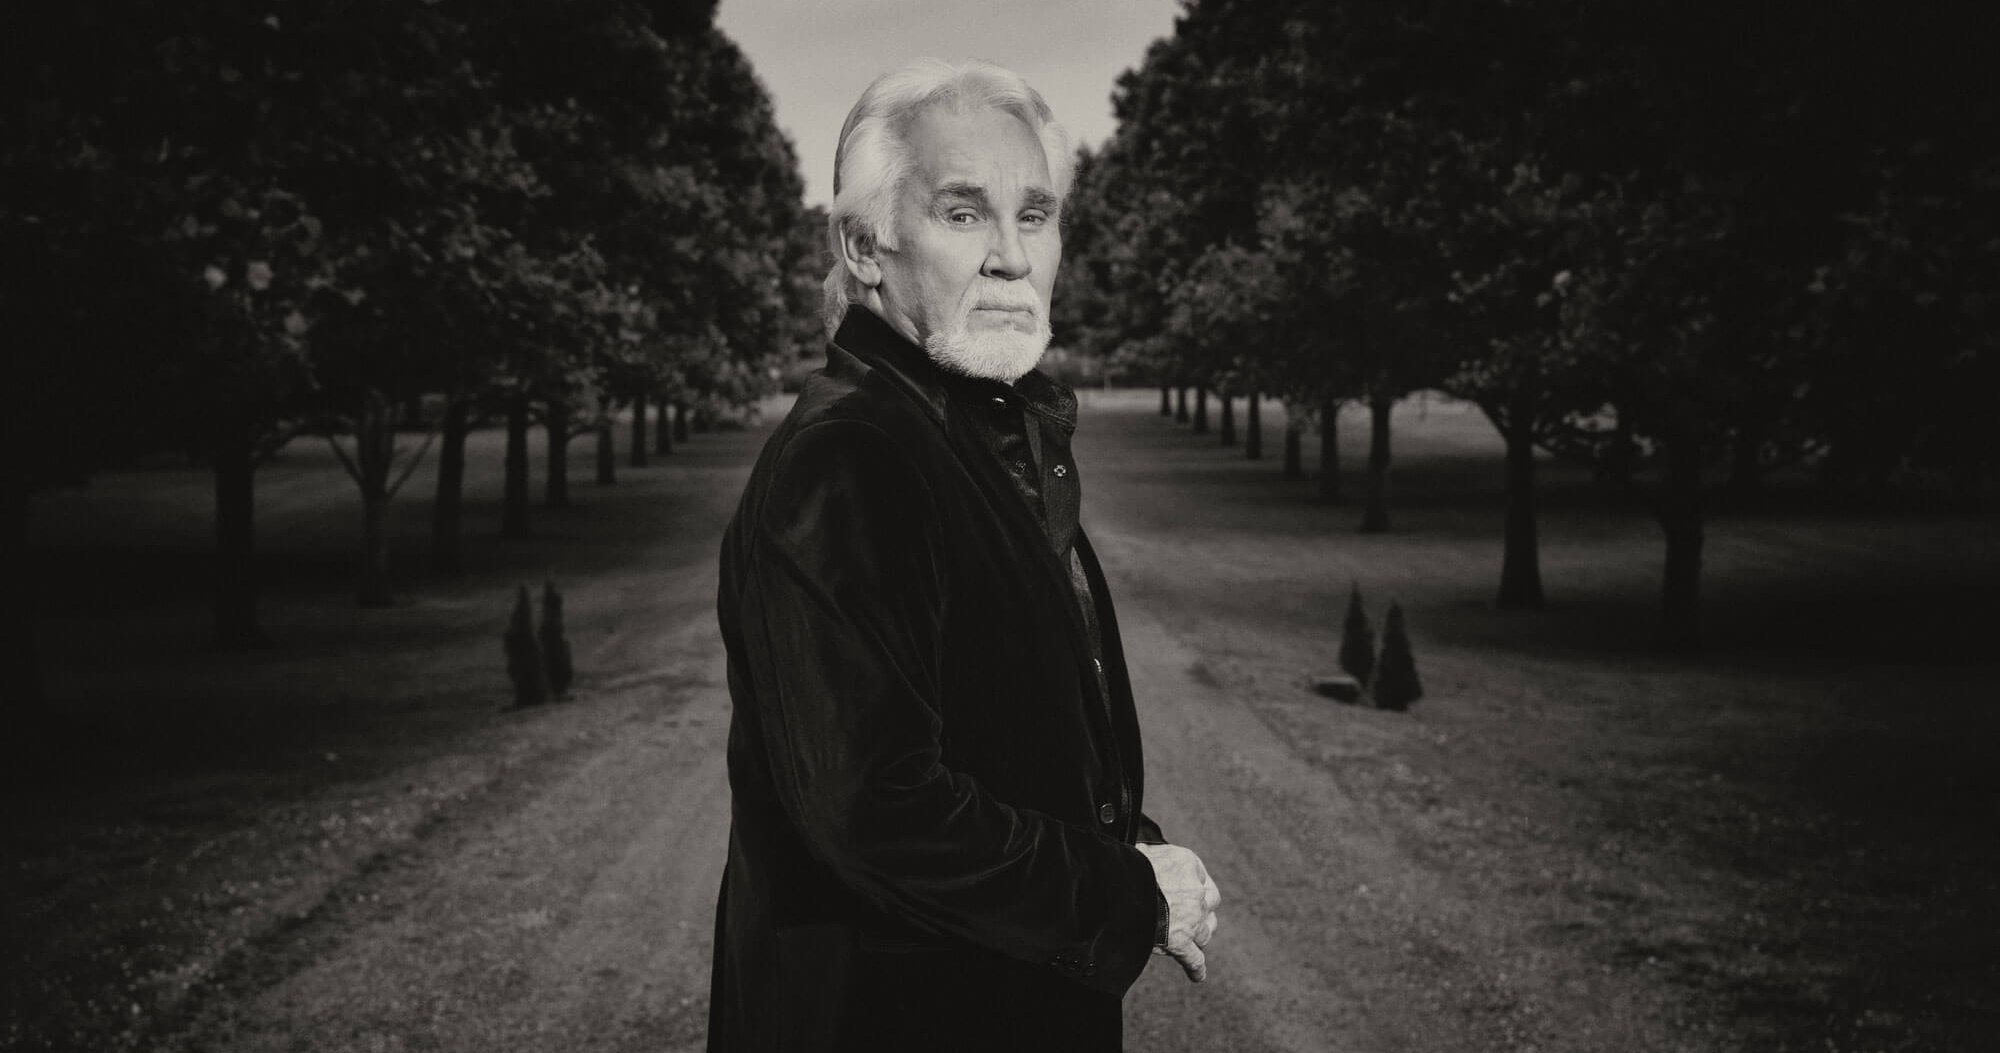 kenny rogers